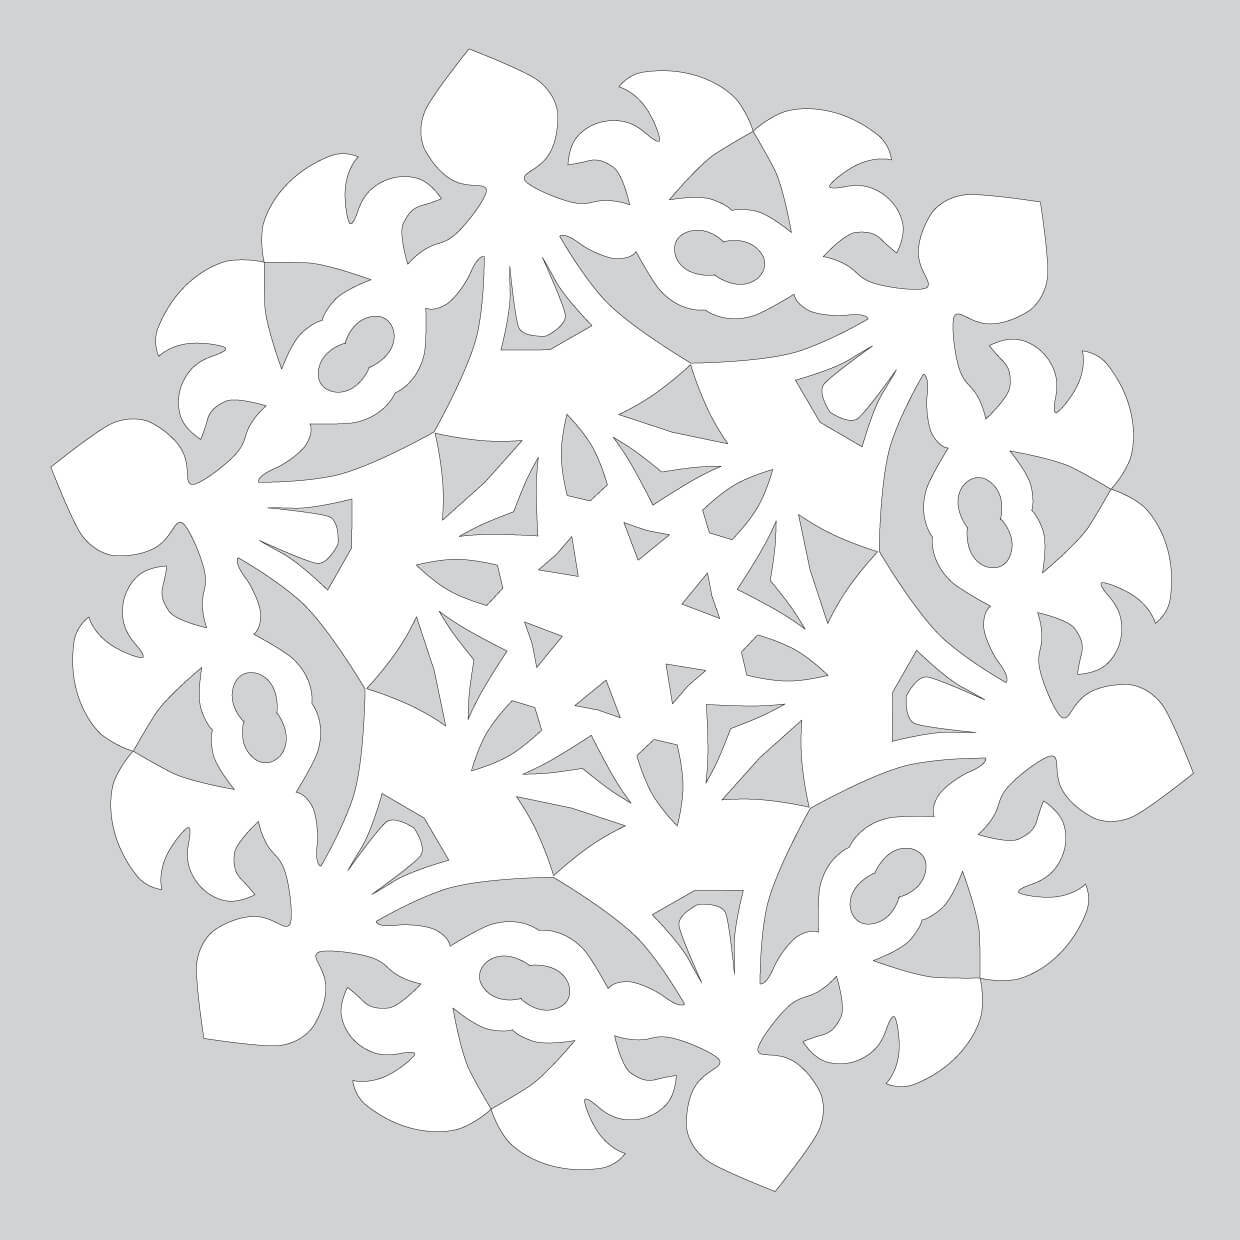 Blank Template To Draw A Pattern For Paper Snowflake | Free Throughout Blank Snowflake Template